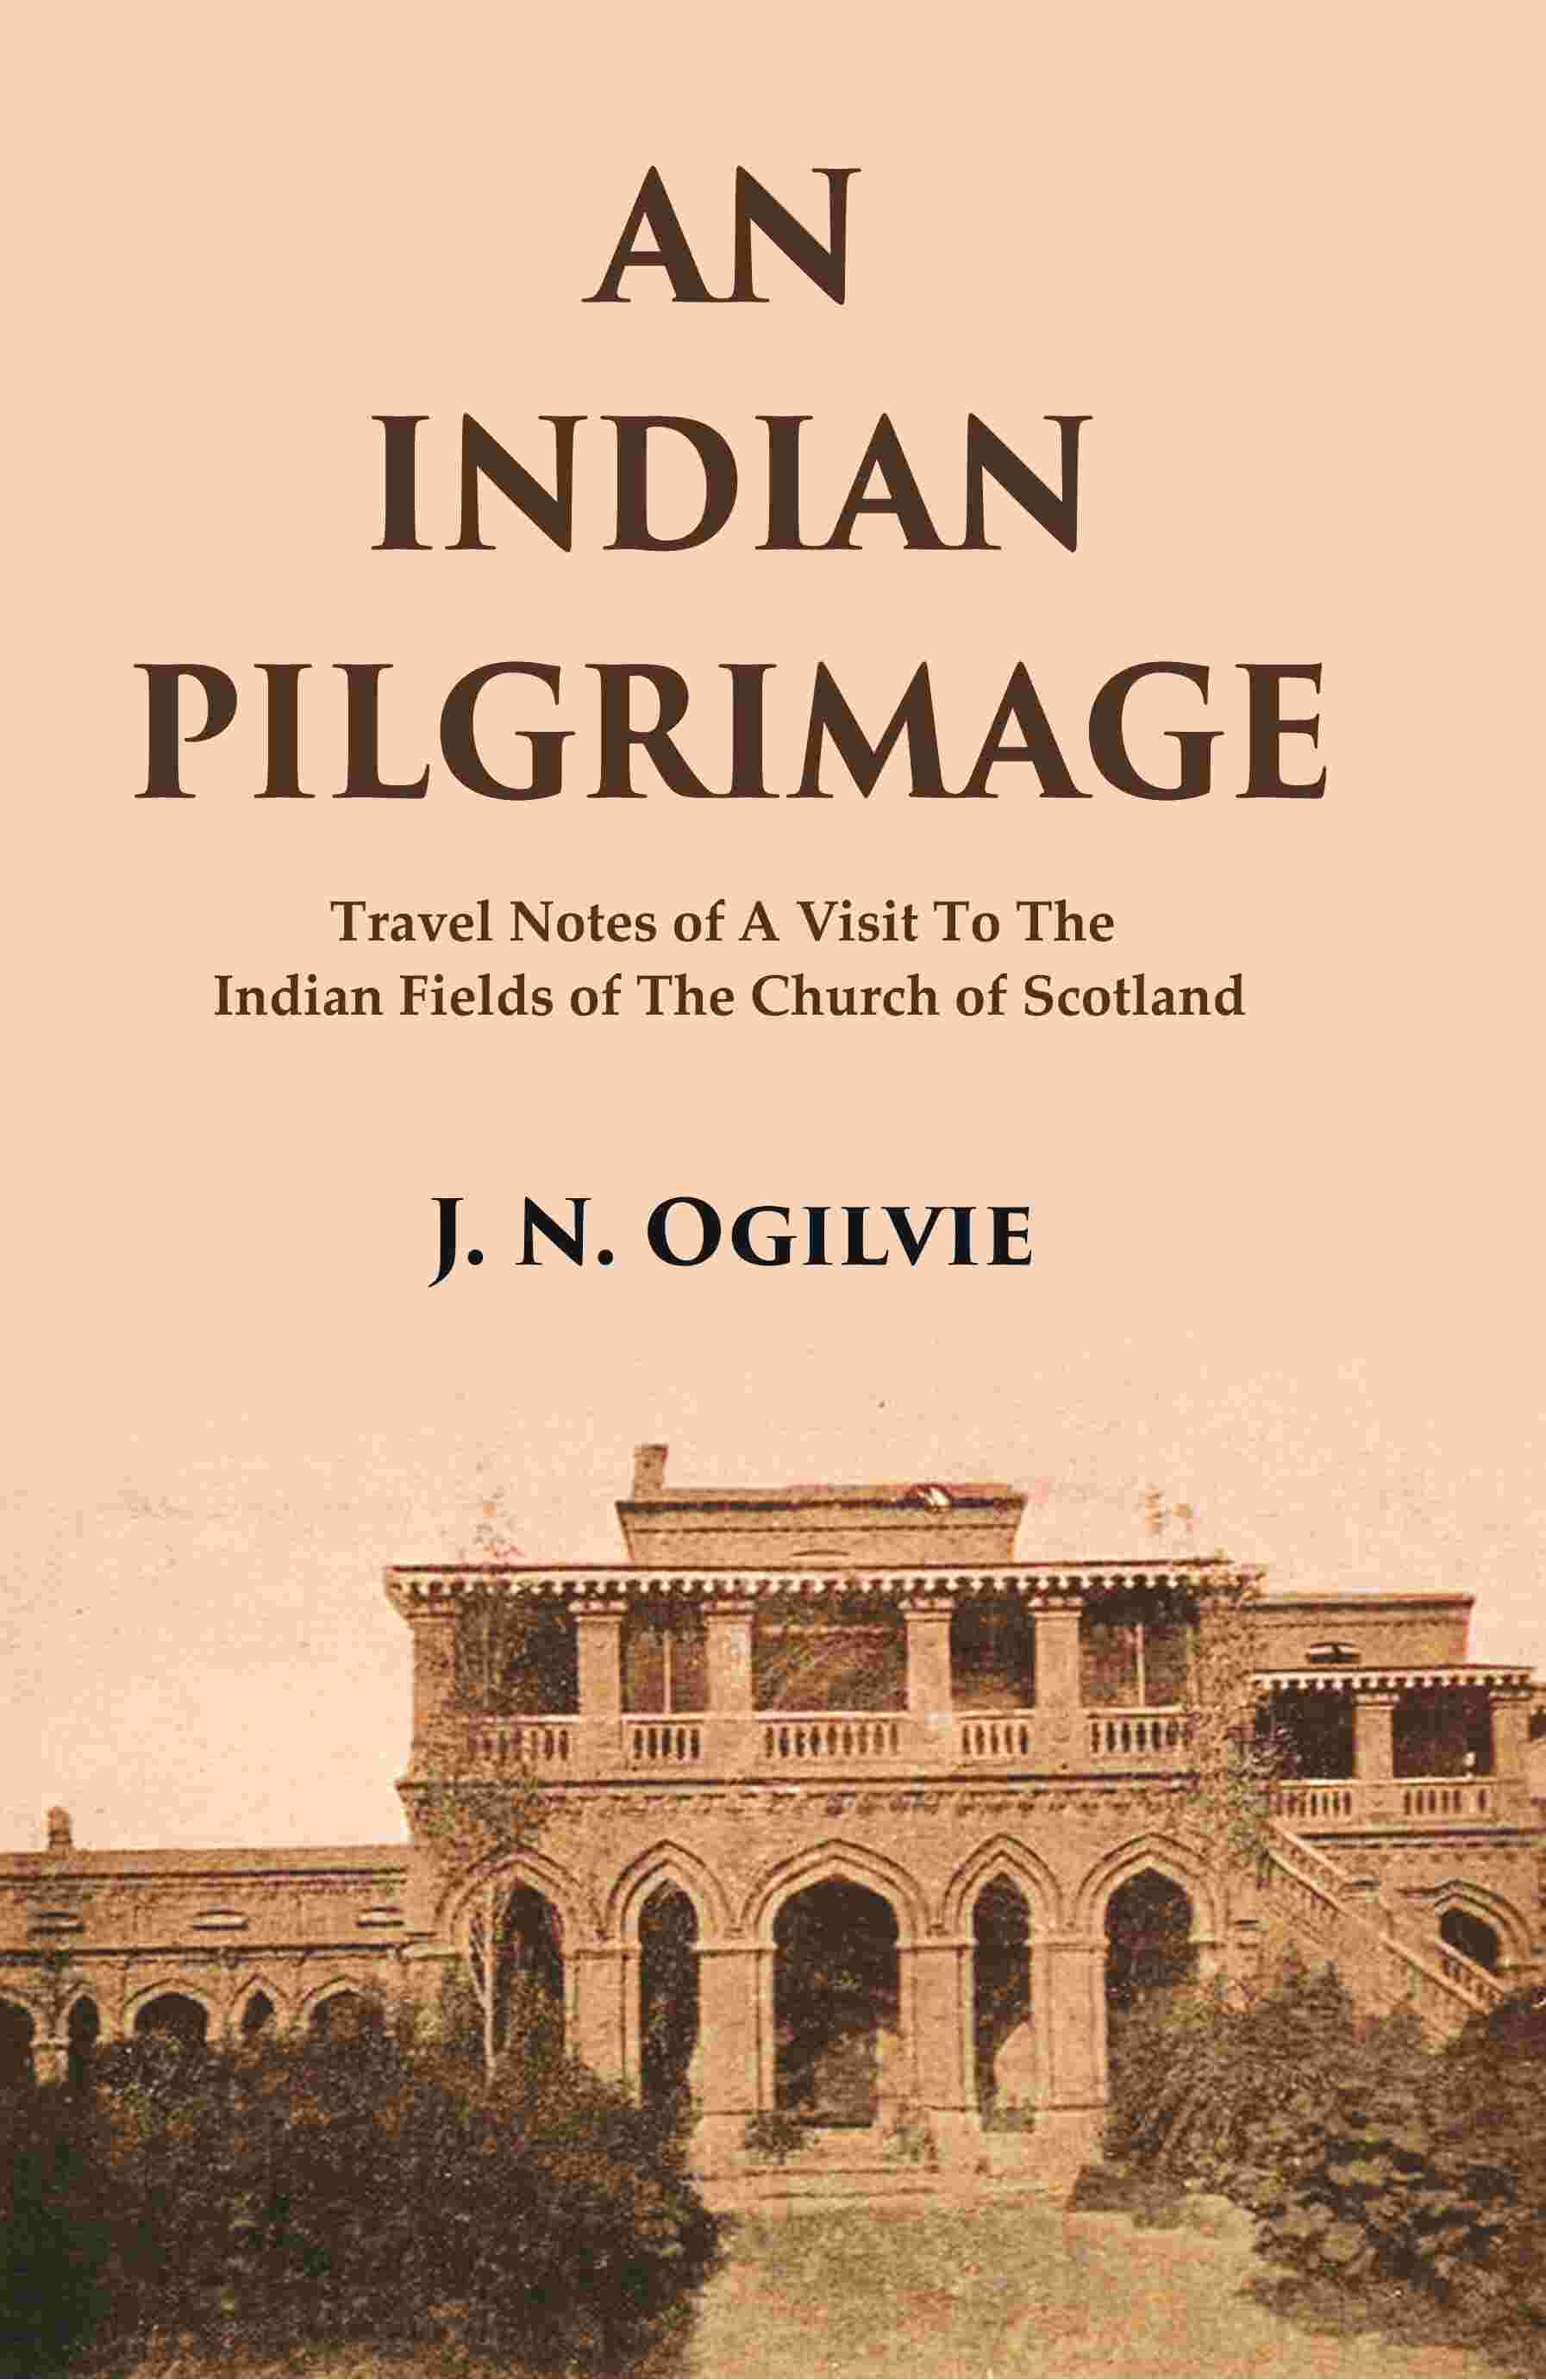 An Indian Pilgrimage: Travel Notes of a Visit to The Indian Fields of The Church of Scotland